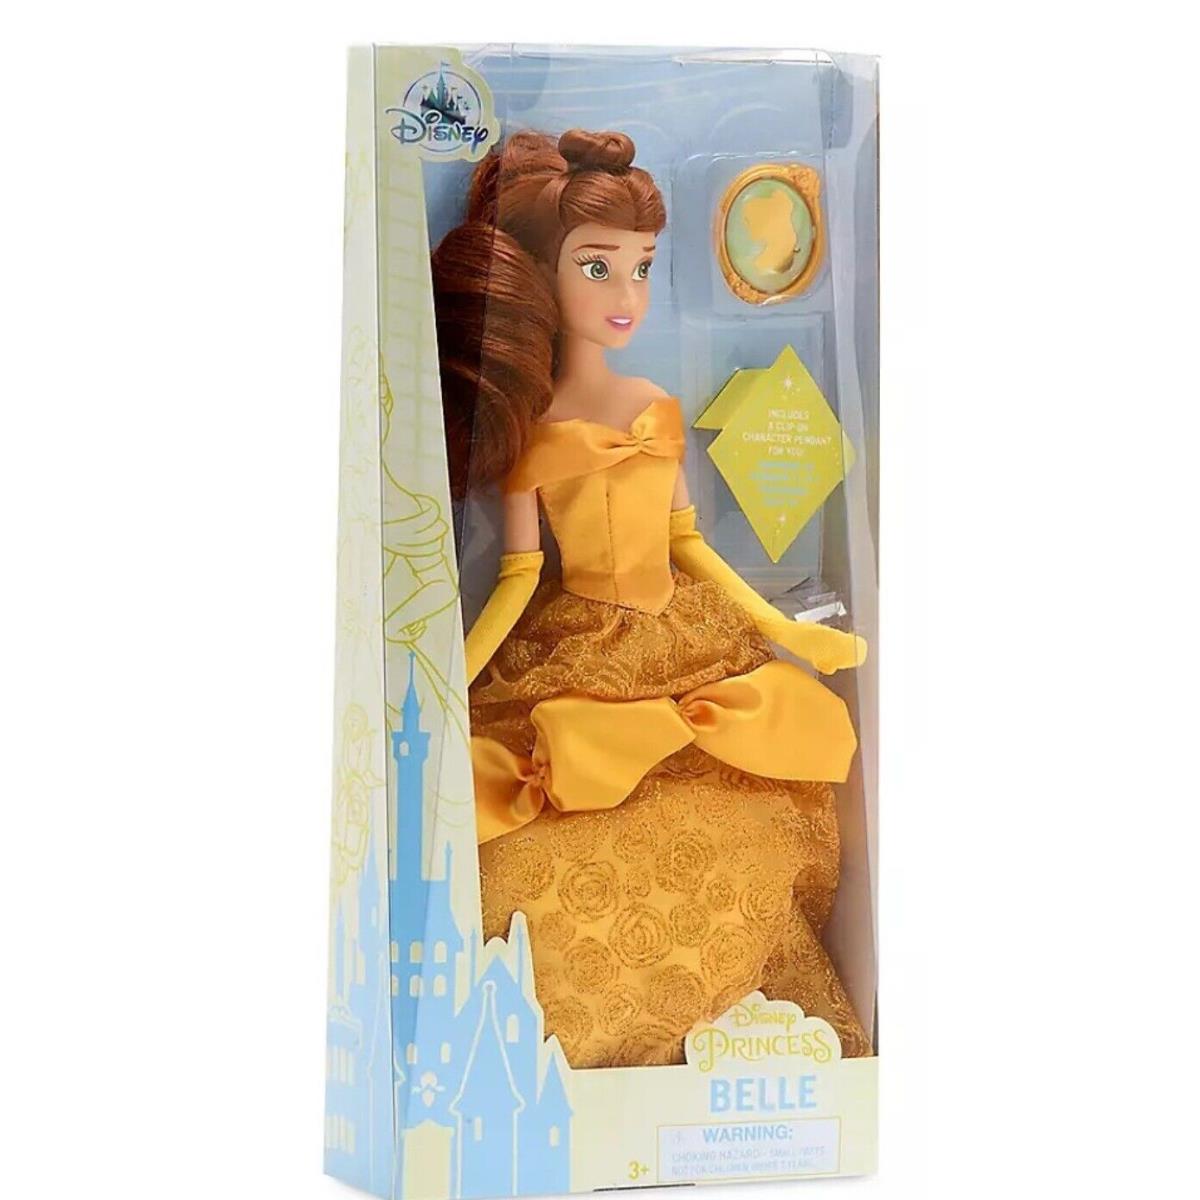 Disney Store Princess Belle Classic Doll Accessory Pack Set Beauty and Beast